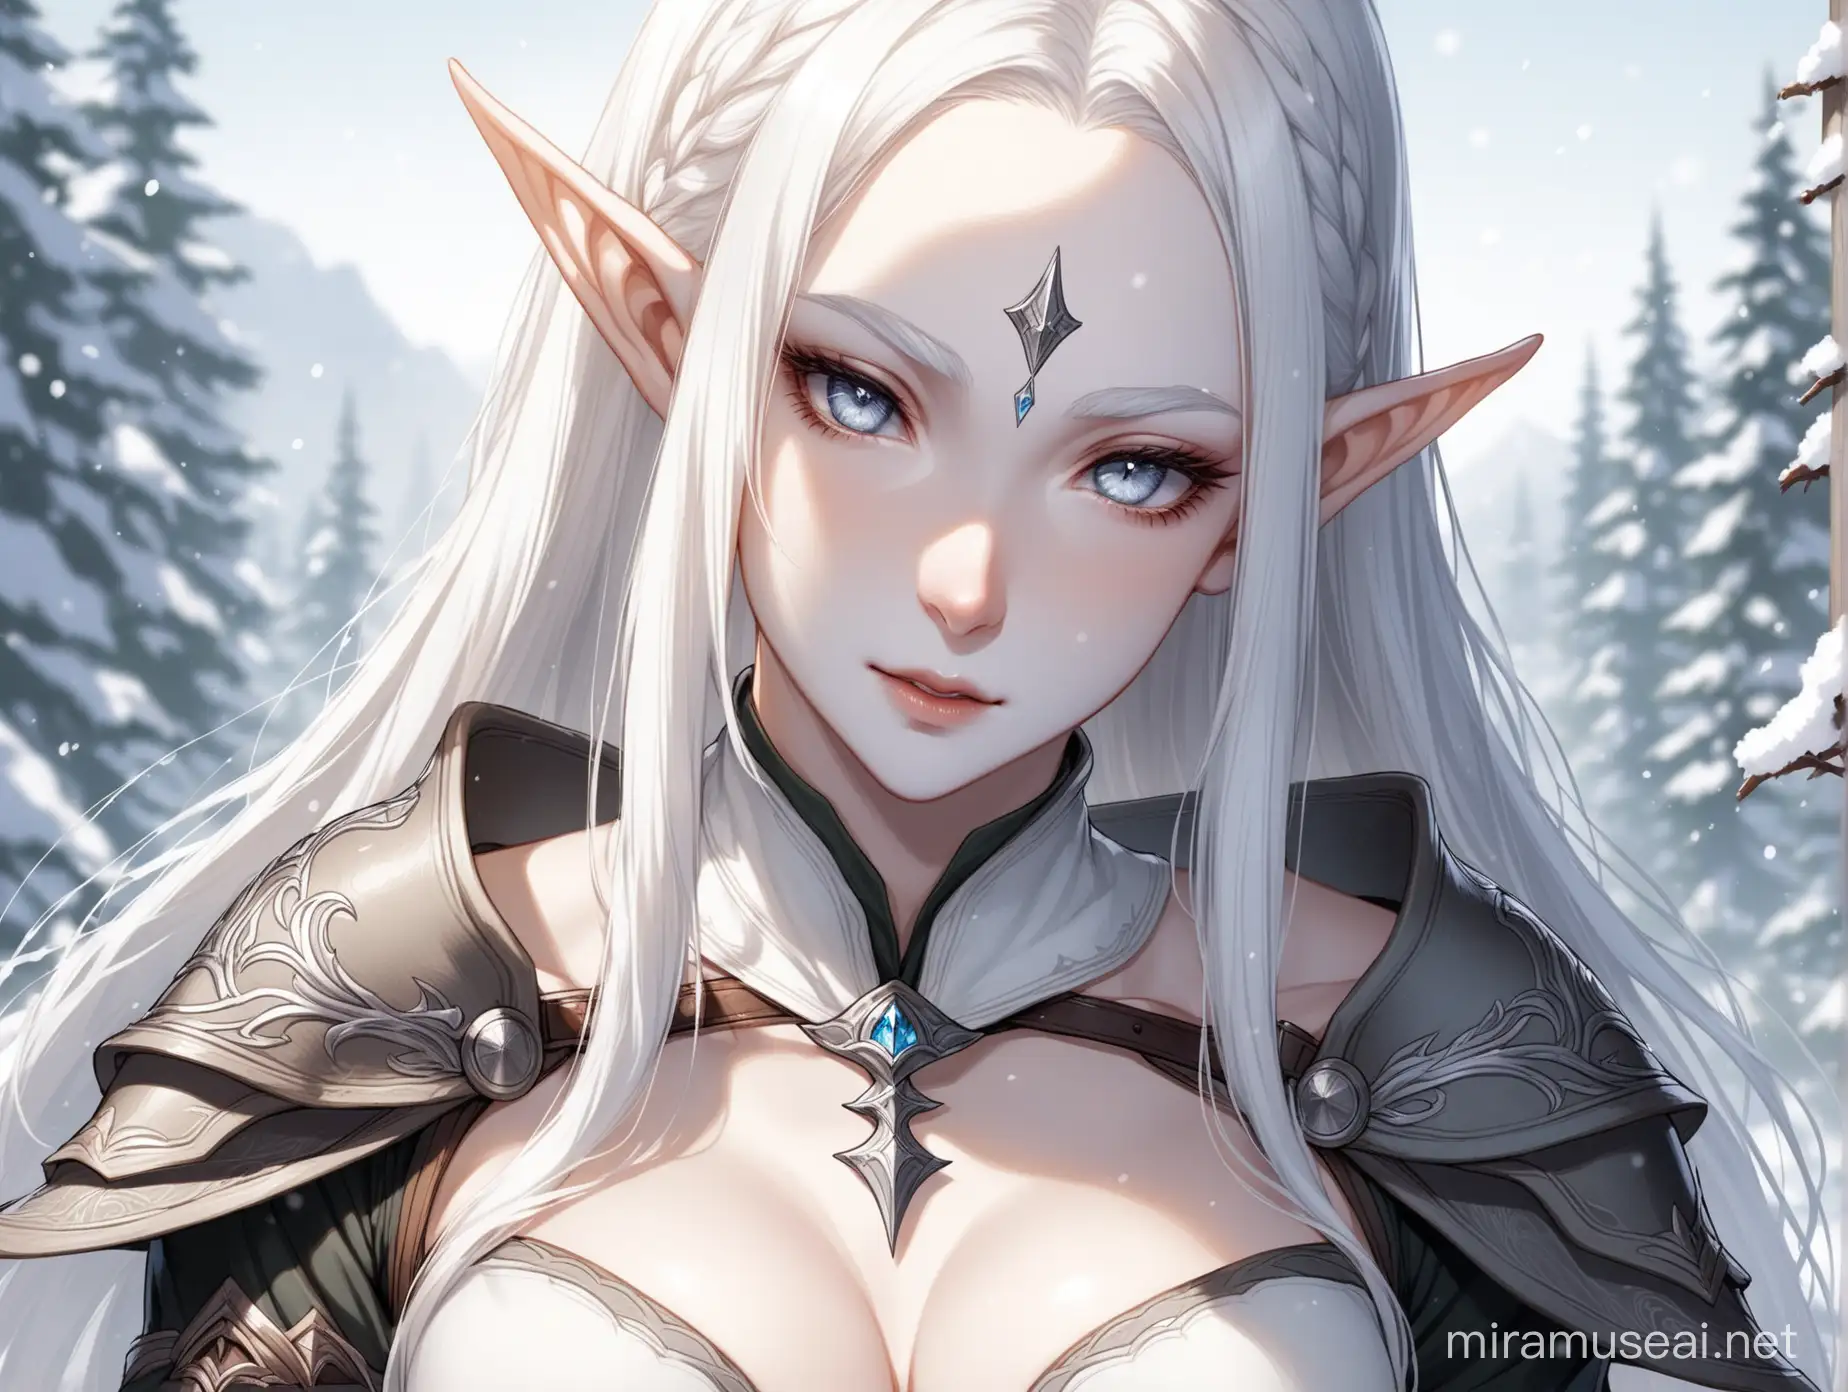 Majestic WhiteHaired Elf with Piercing Gray Eyes